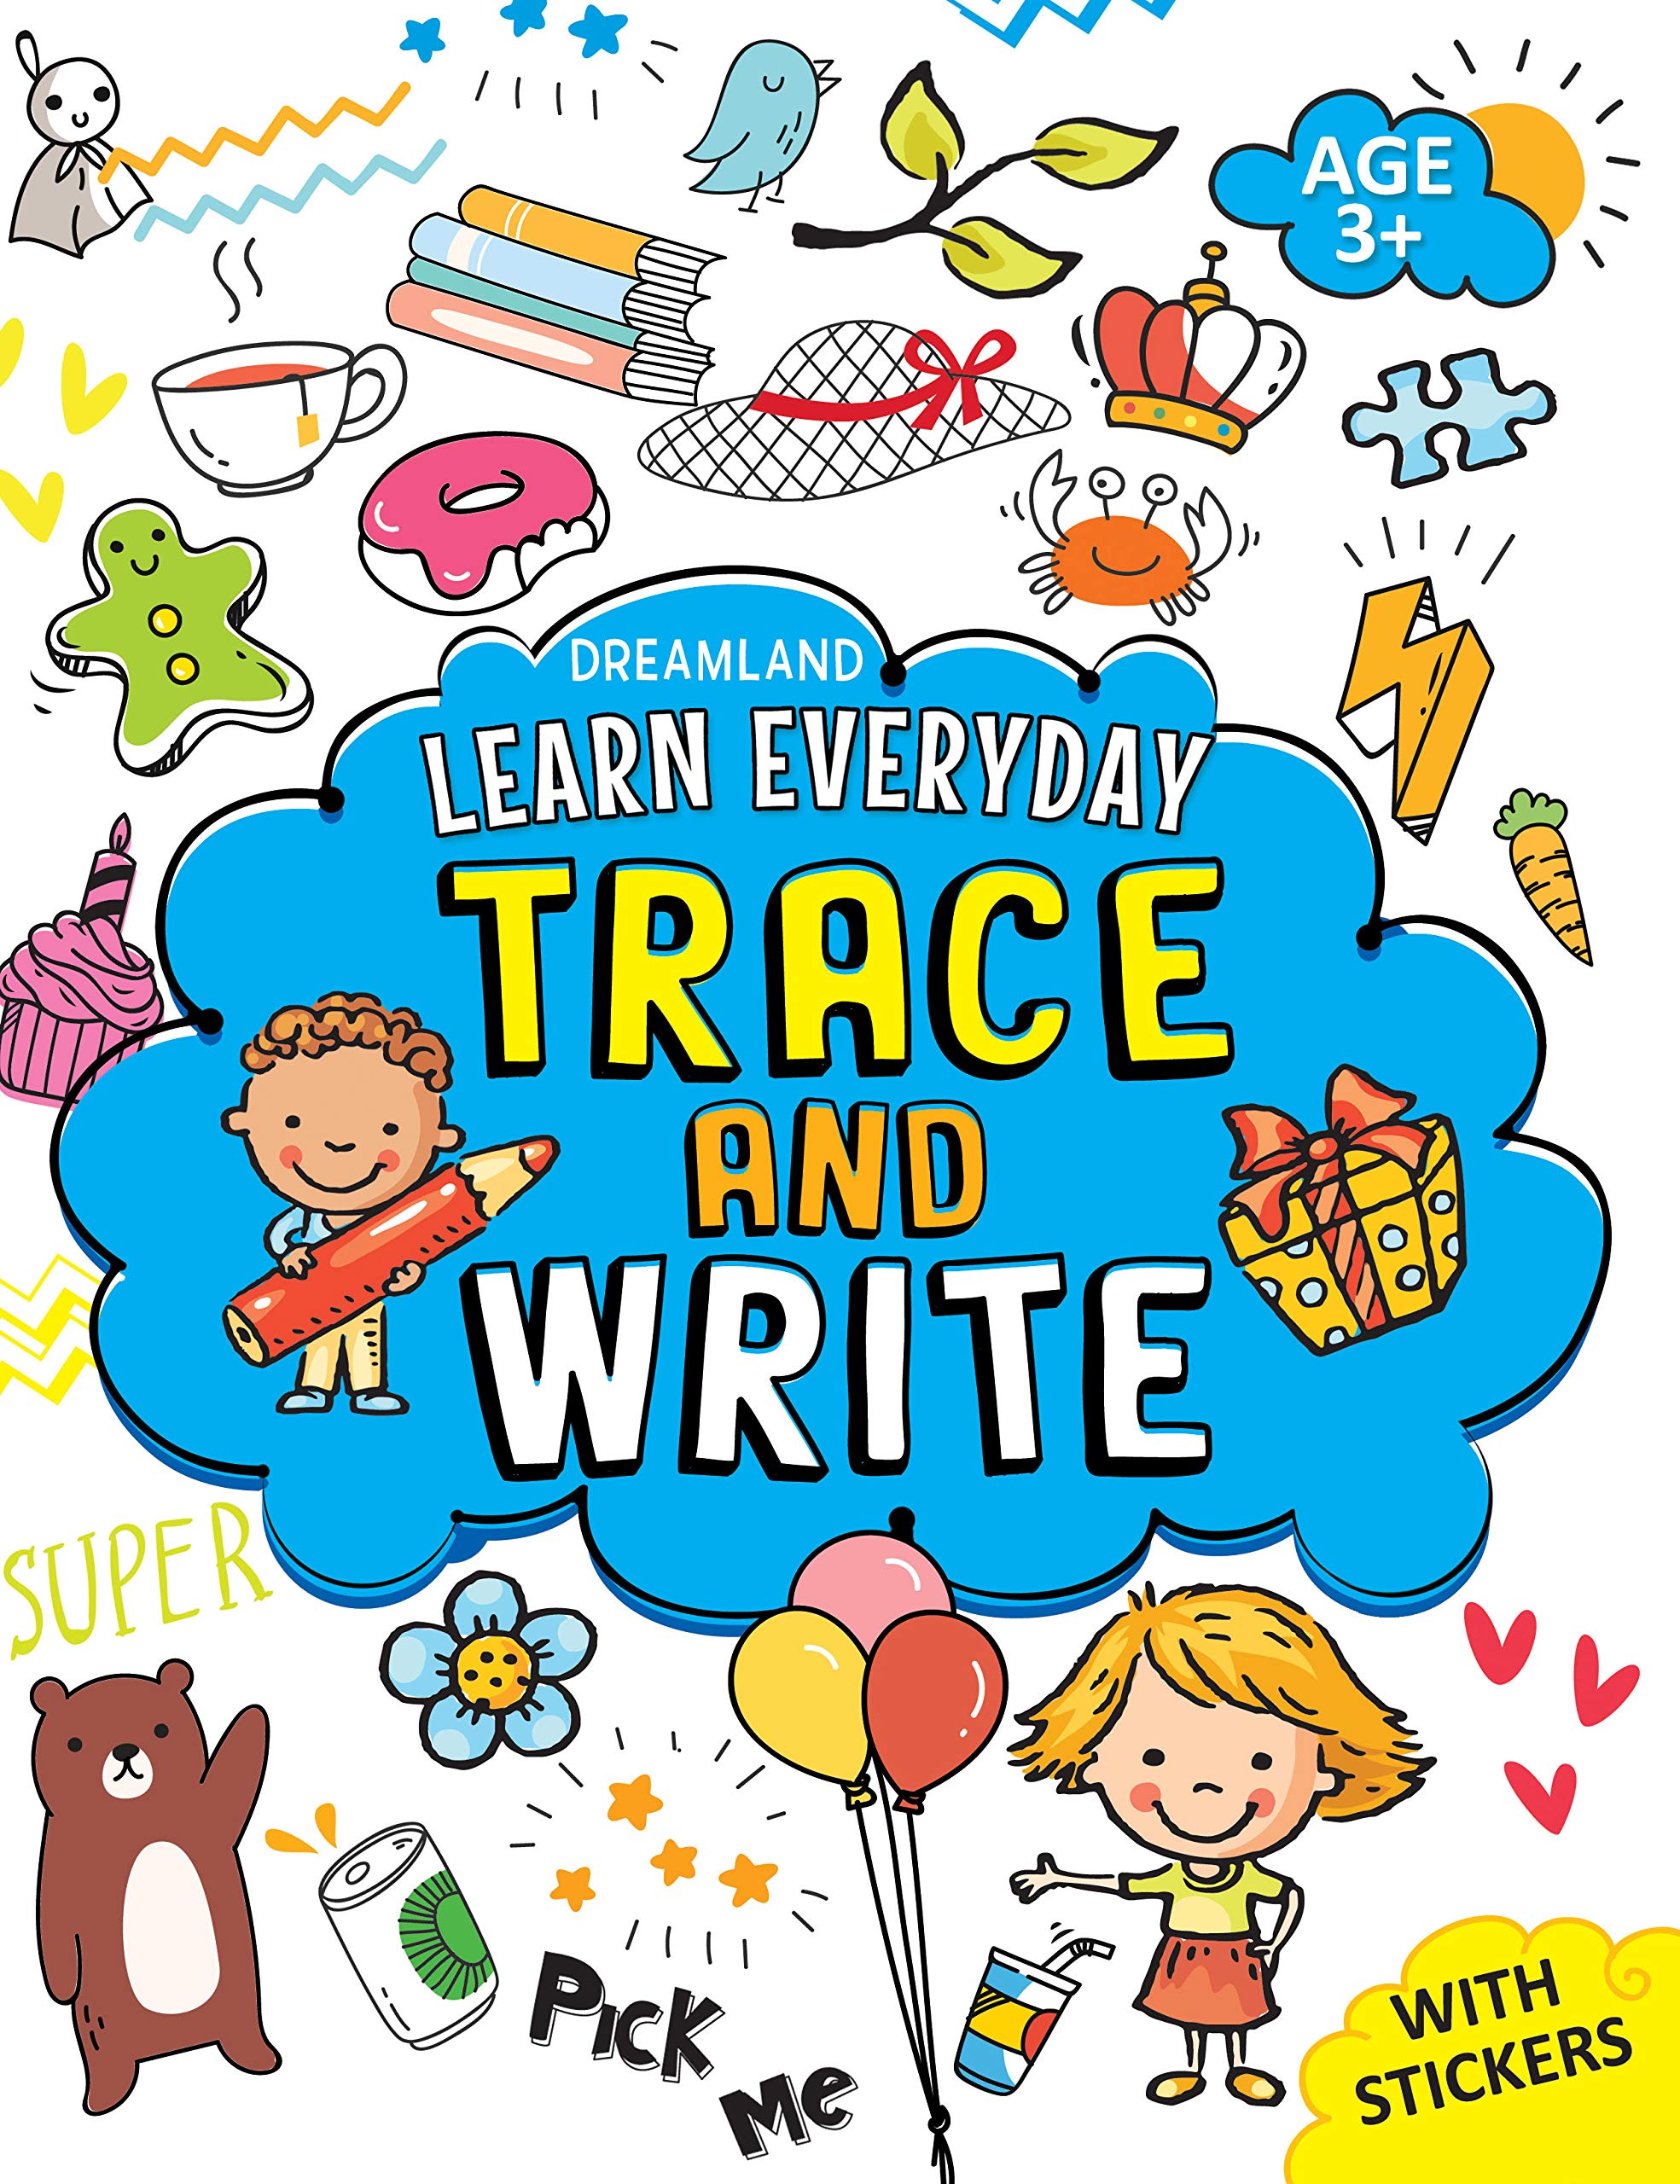 Trace and Write with Stickers - Learn Everyday Series For Children Paperback